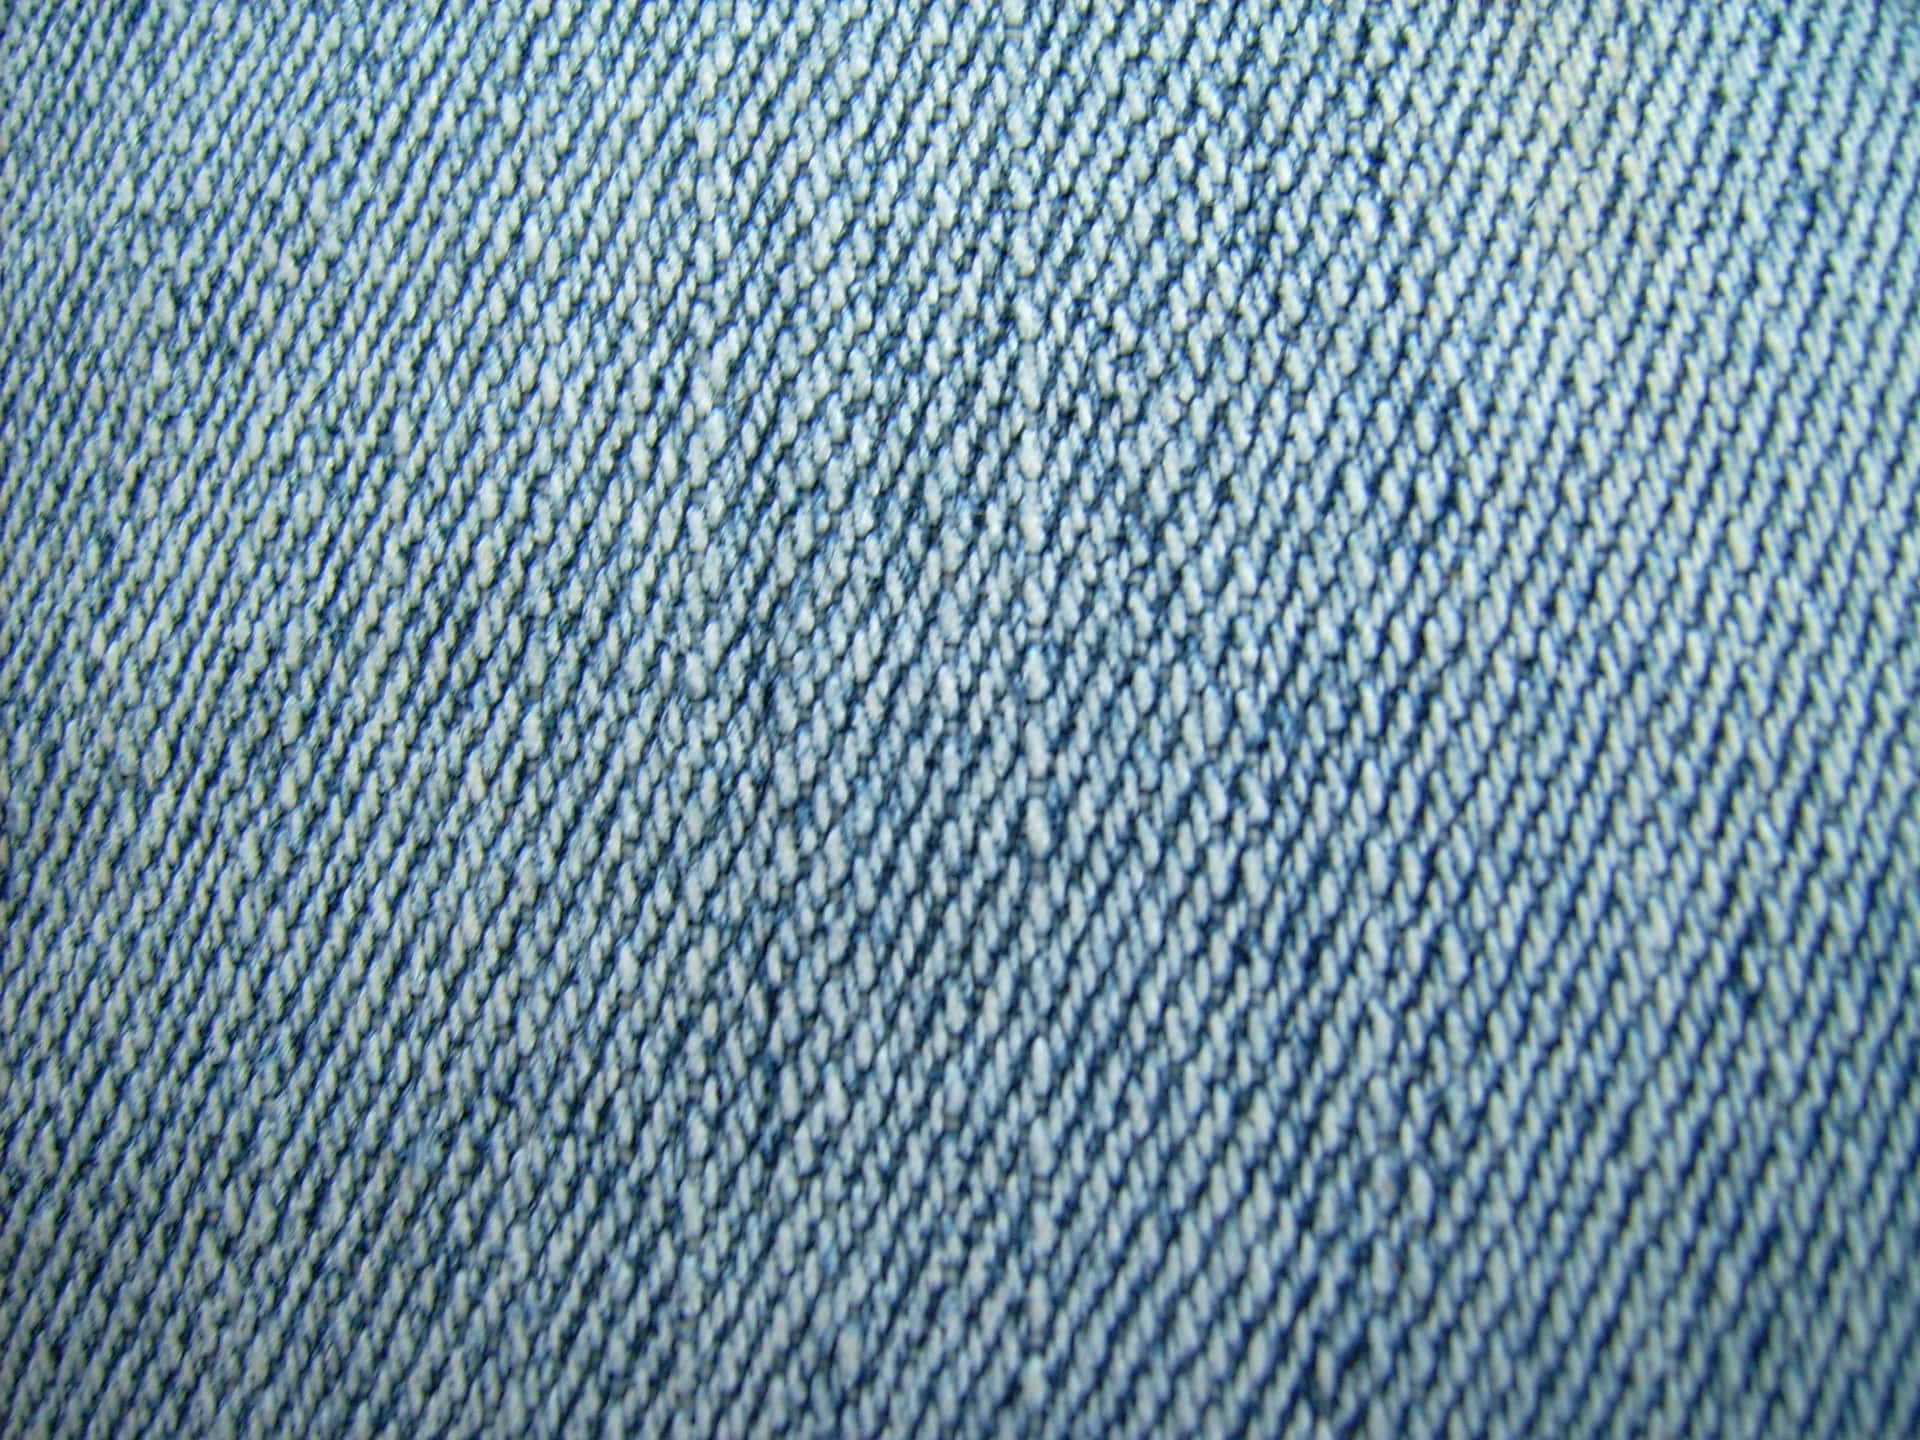 Blue Torn Jeans Fabric Texture. Distressed Denim with Sewn-up Hole and Seam  Background Stock Image - Image of closeup, material: 203603041